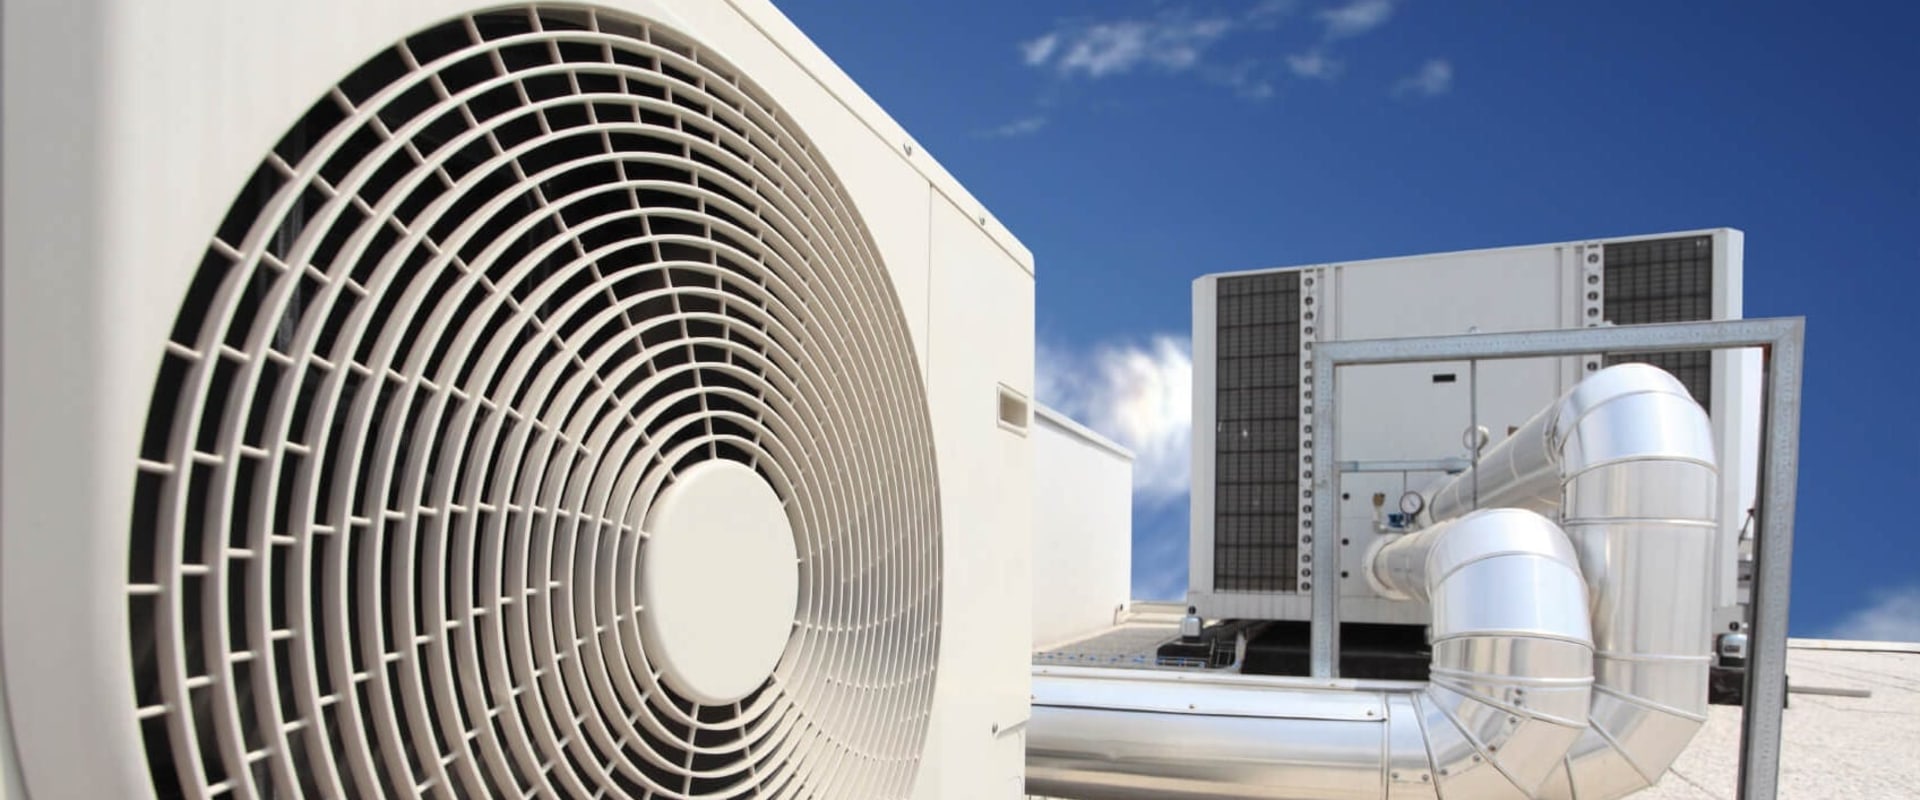 Can I Save Money by Doing My Own Air Conditioning System Repairs in Pembroke Pines, FL?